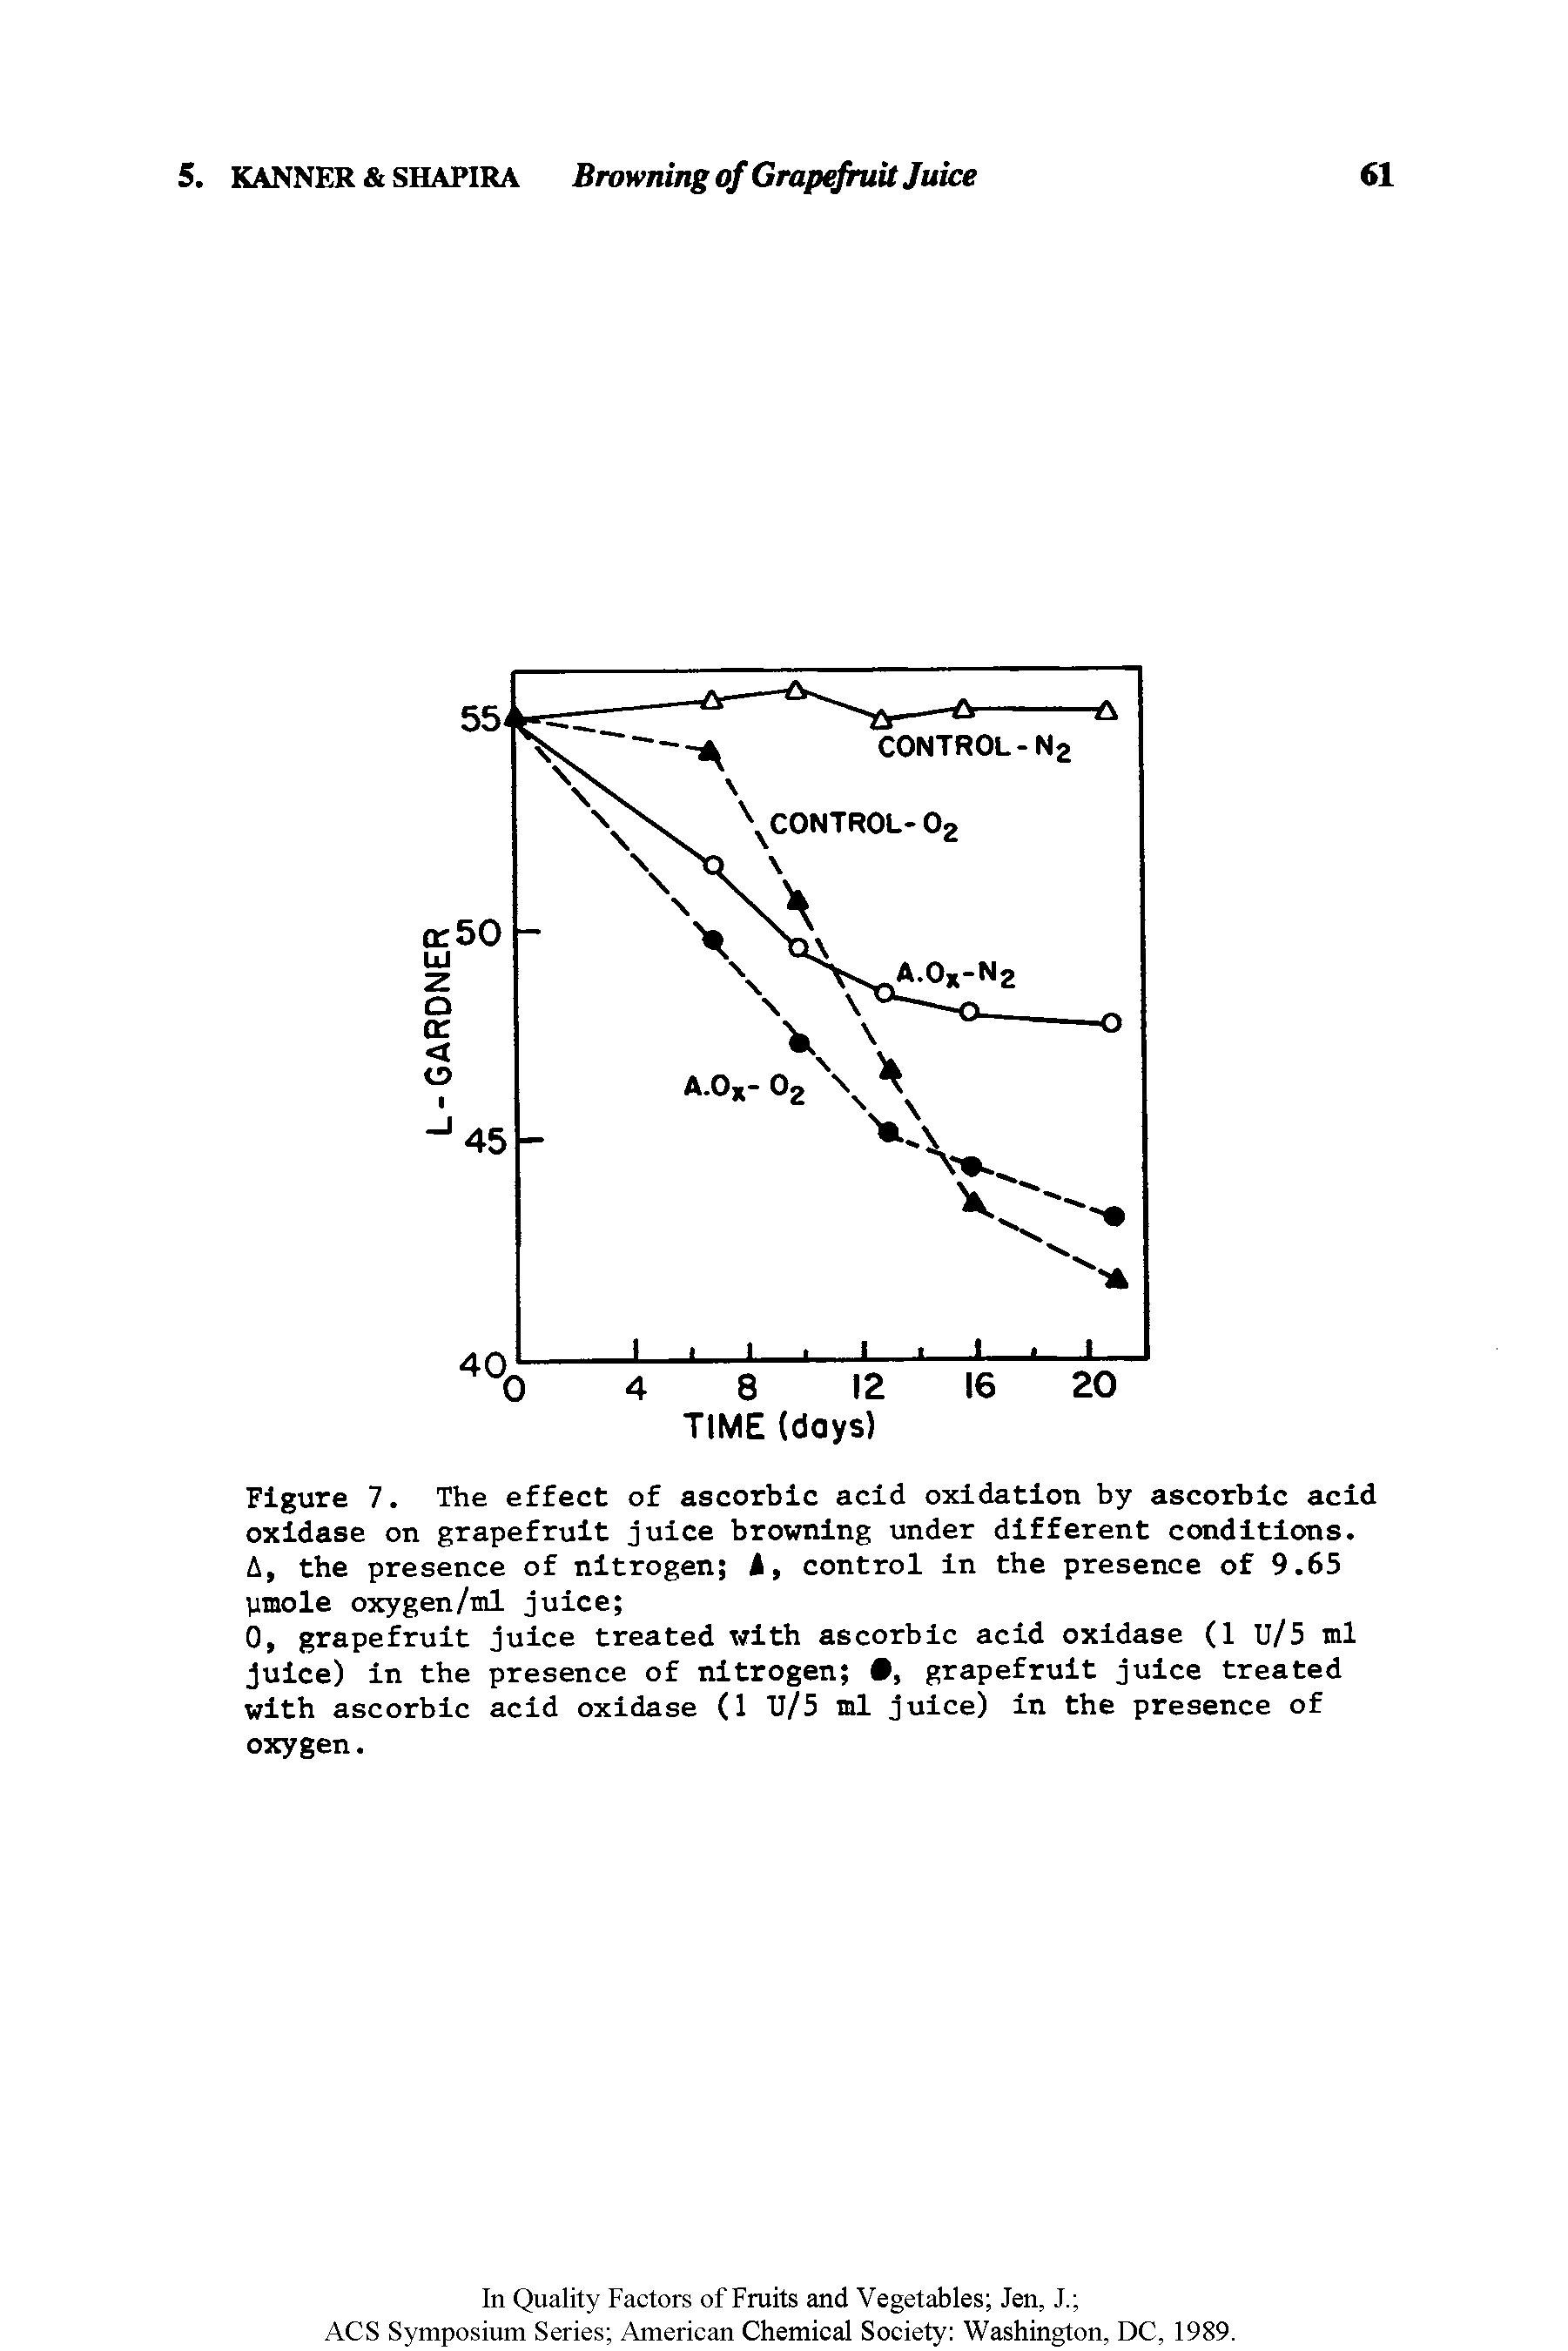 Figure 7. The effect of ascorbic acid oxidation by ascorbic acid oxidase on grapefruit juice browning under different conditions. A, the presence of nitrogen k, control in the presence of 9.65 pinole oxygen/ml juice ...